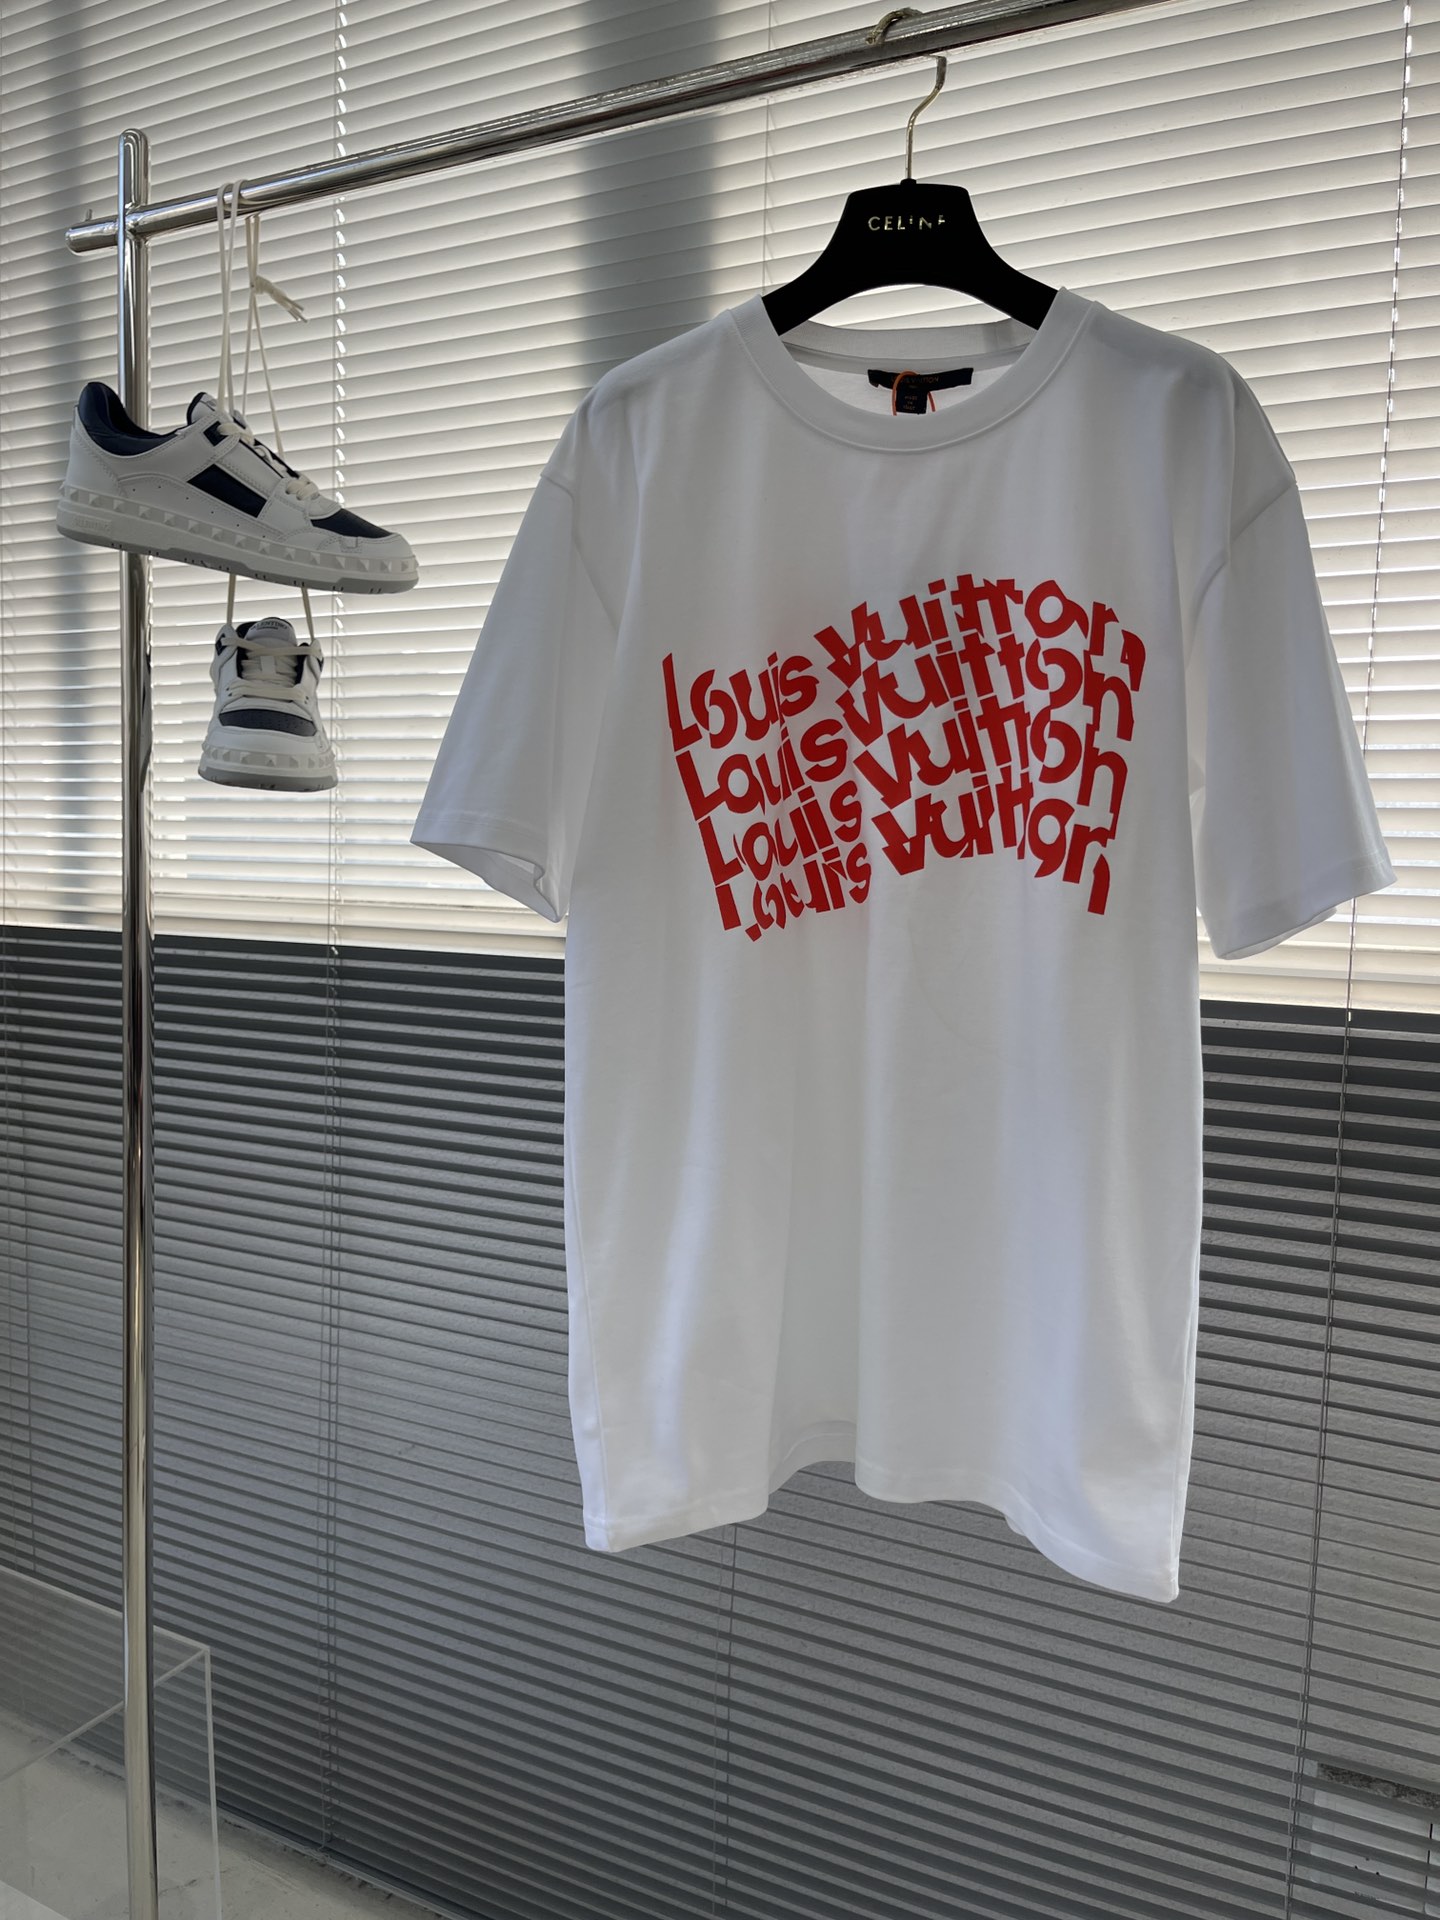 Louis Vuitton Clothing T-Shirt Printing Unisex Cotton Spring Collection Casual